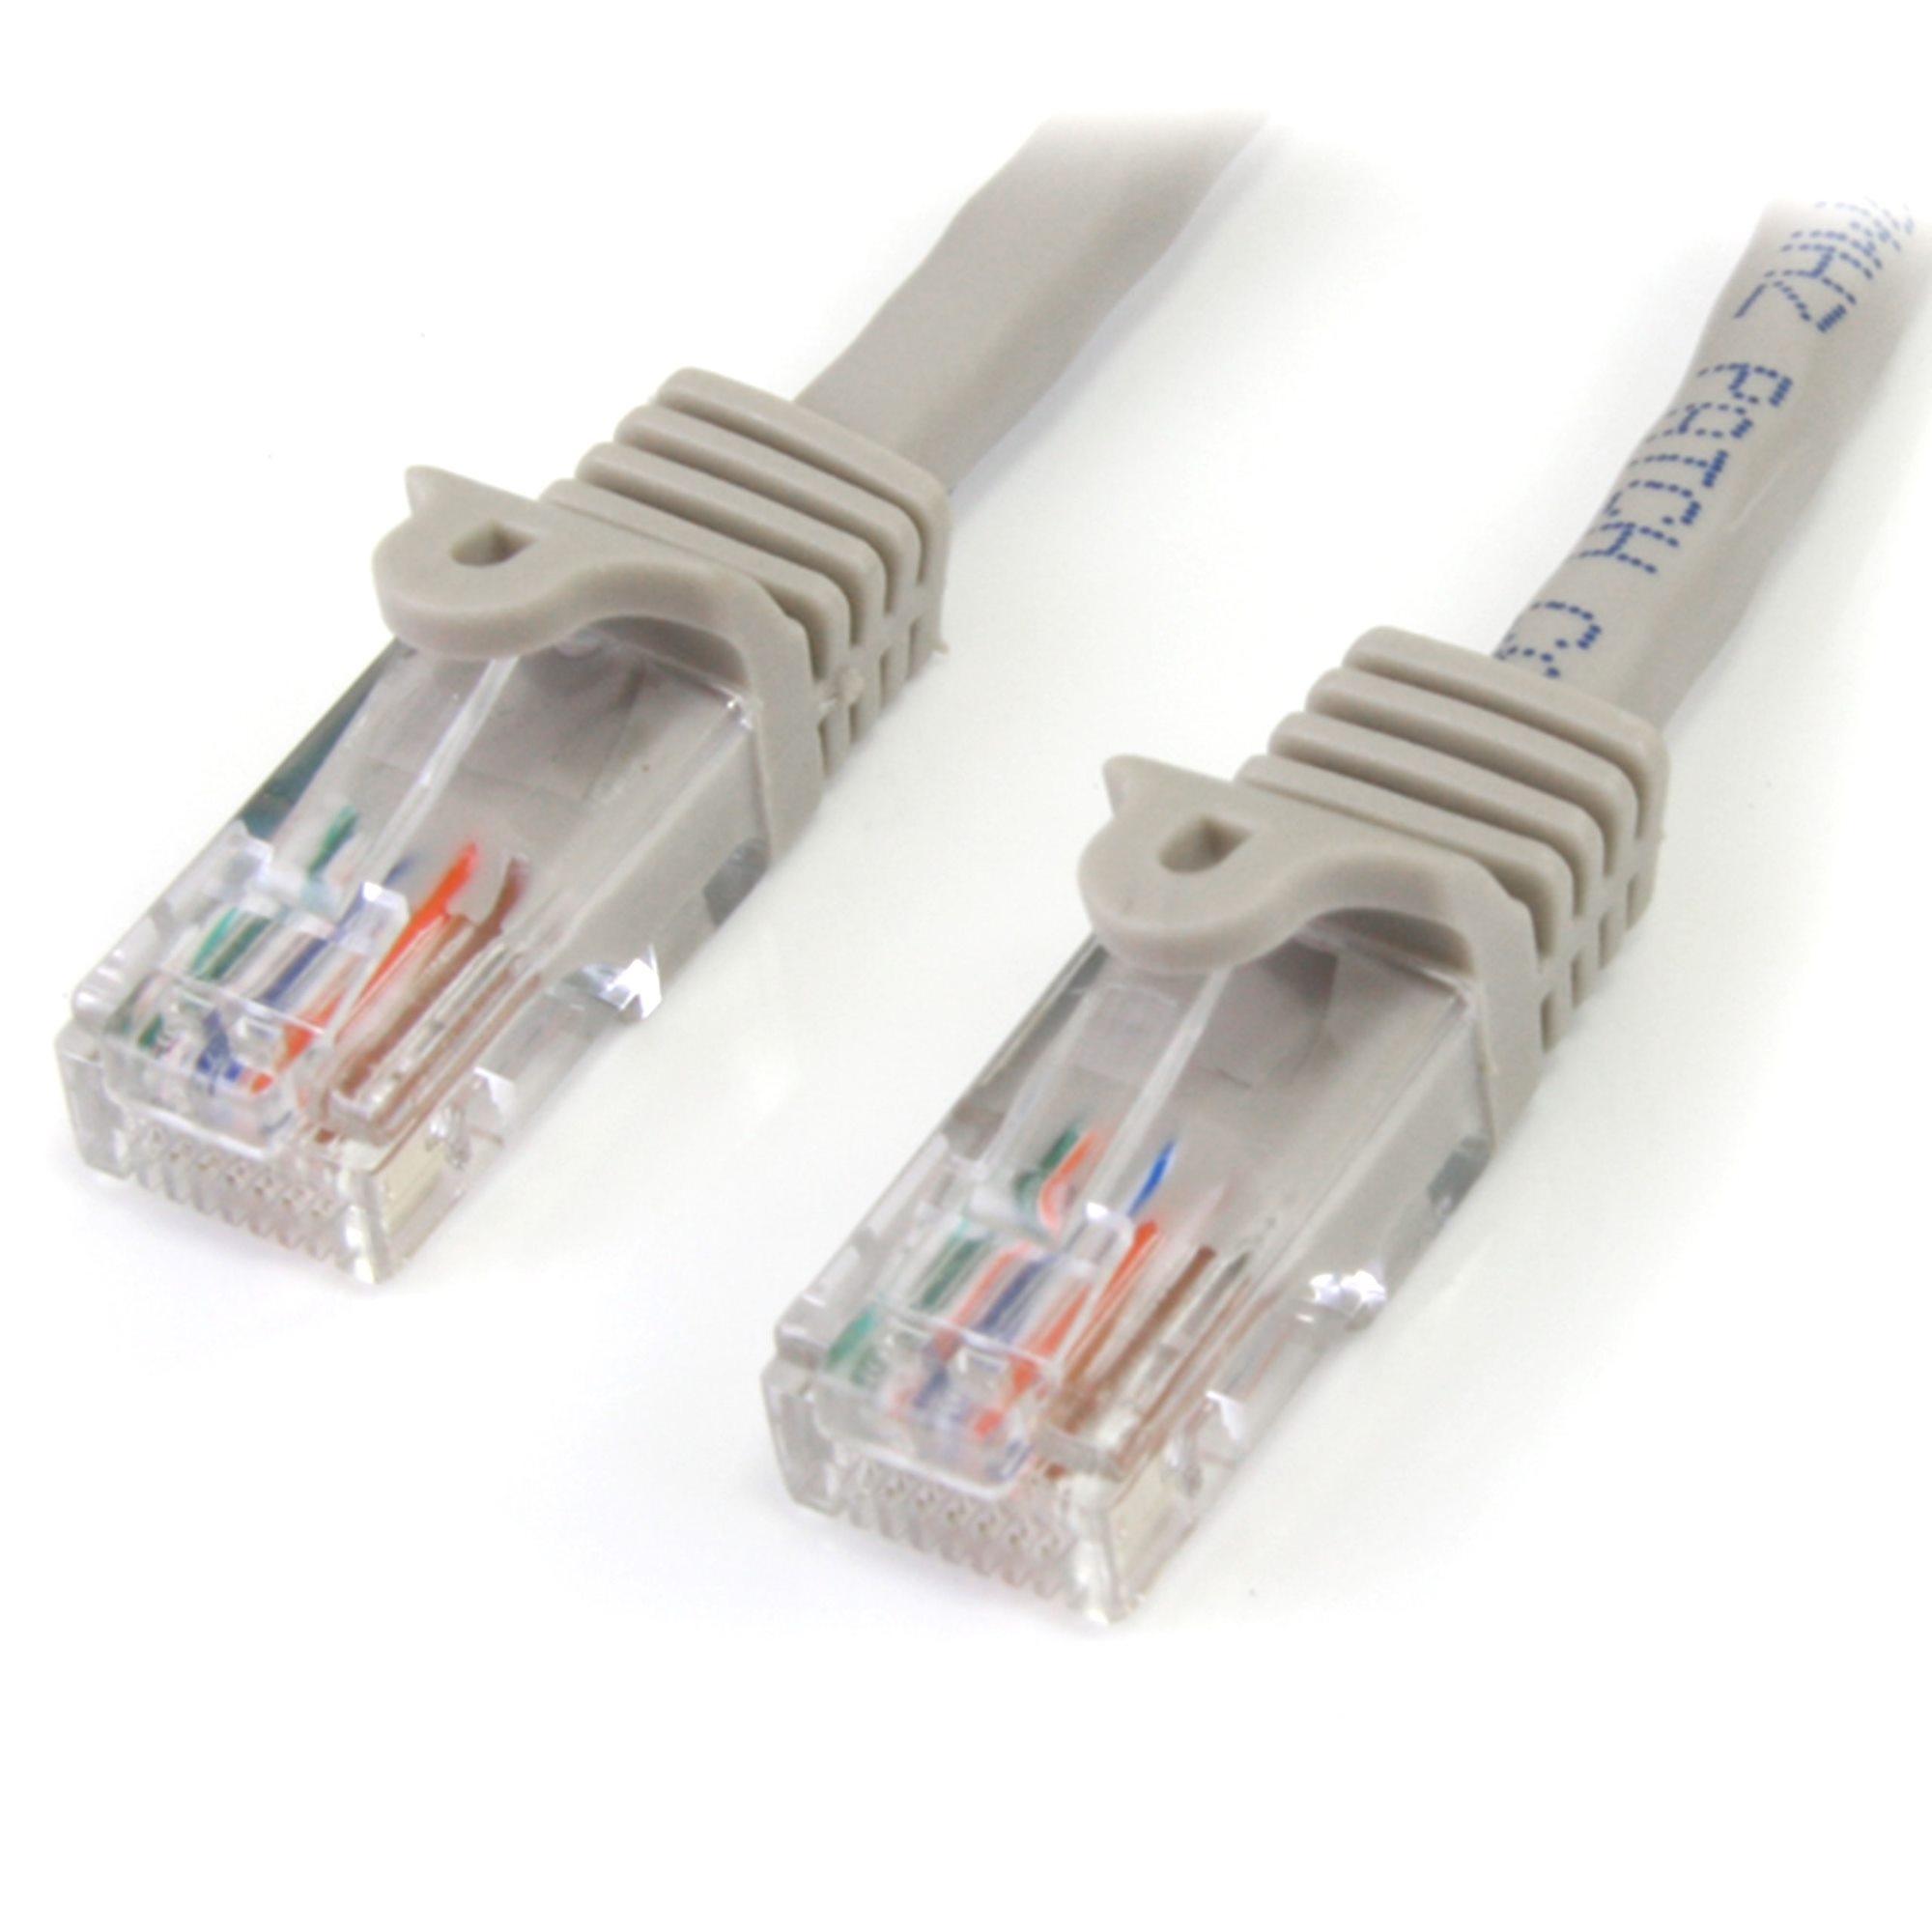 StarTech Snagless UTP Cat5e Patch Cable (Gray, 1m)